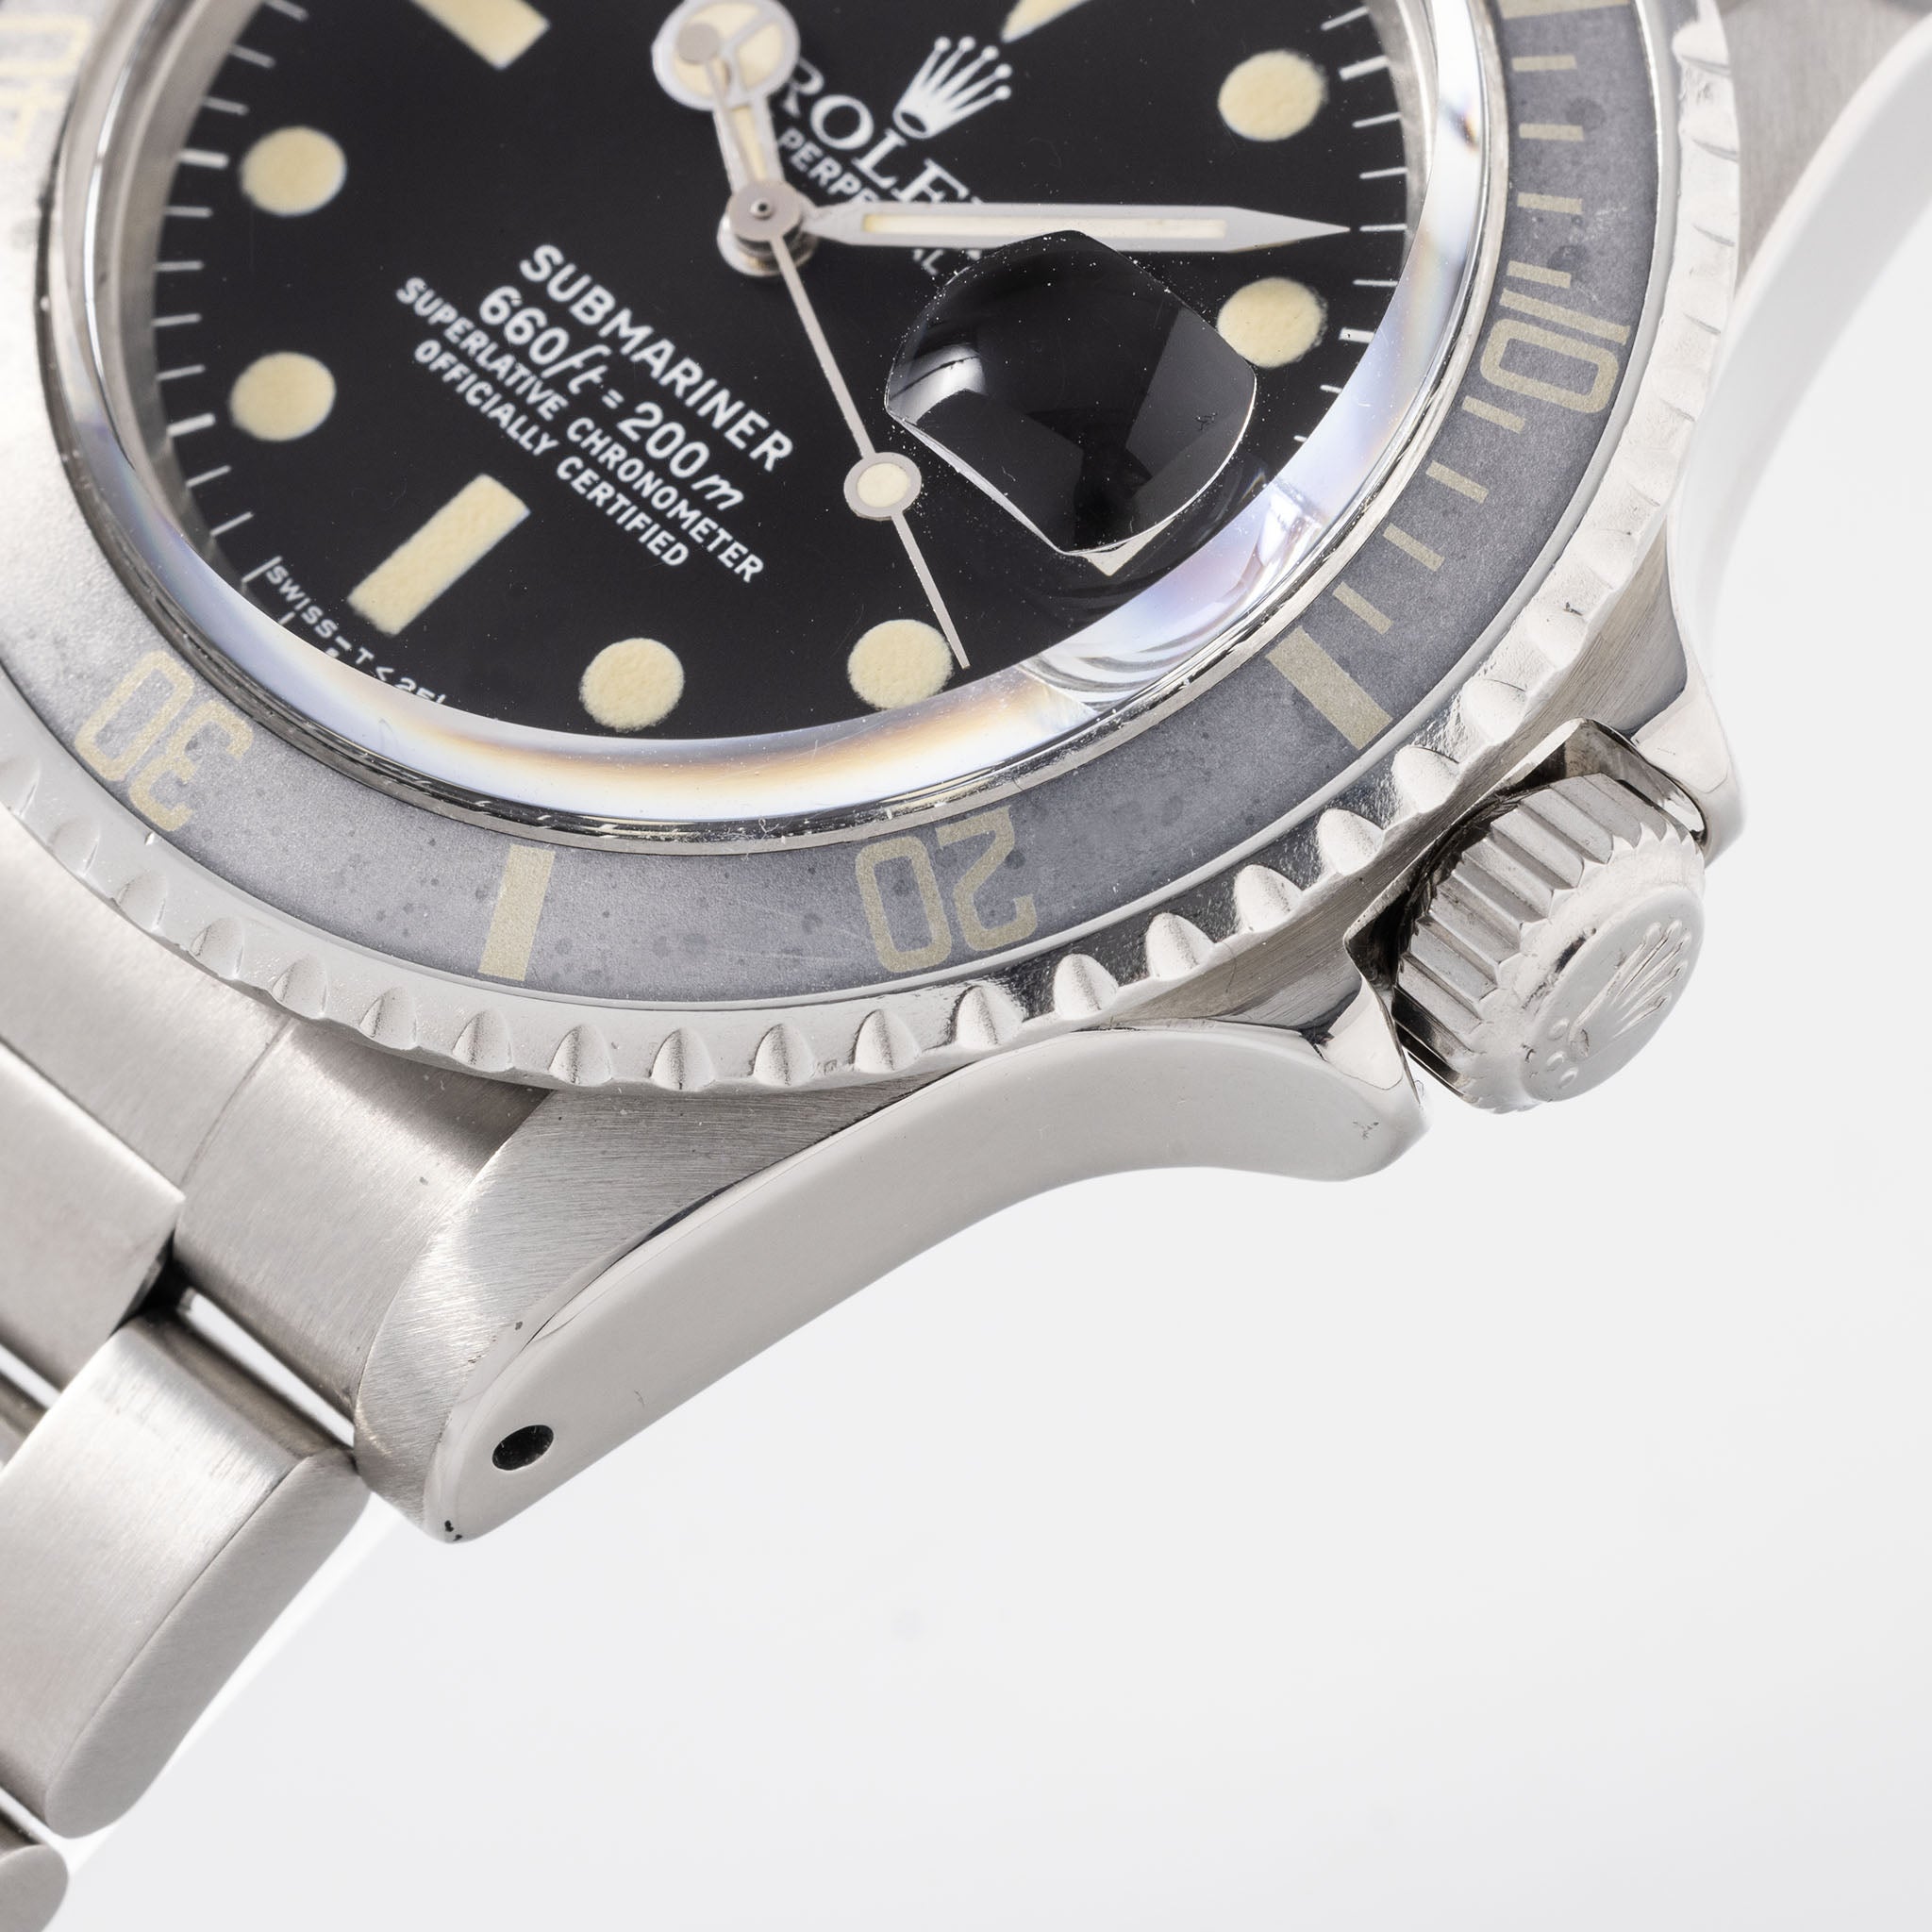 Rolex Submariner 1680 MK1 Maxi Dial Ghost Bezel with Box and Papers